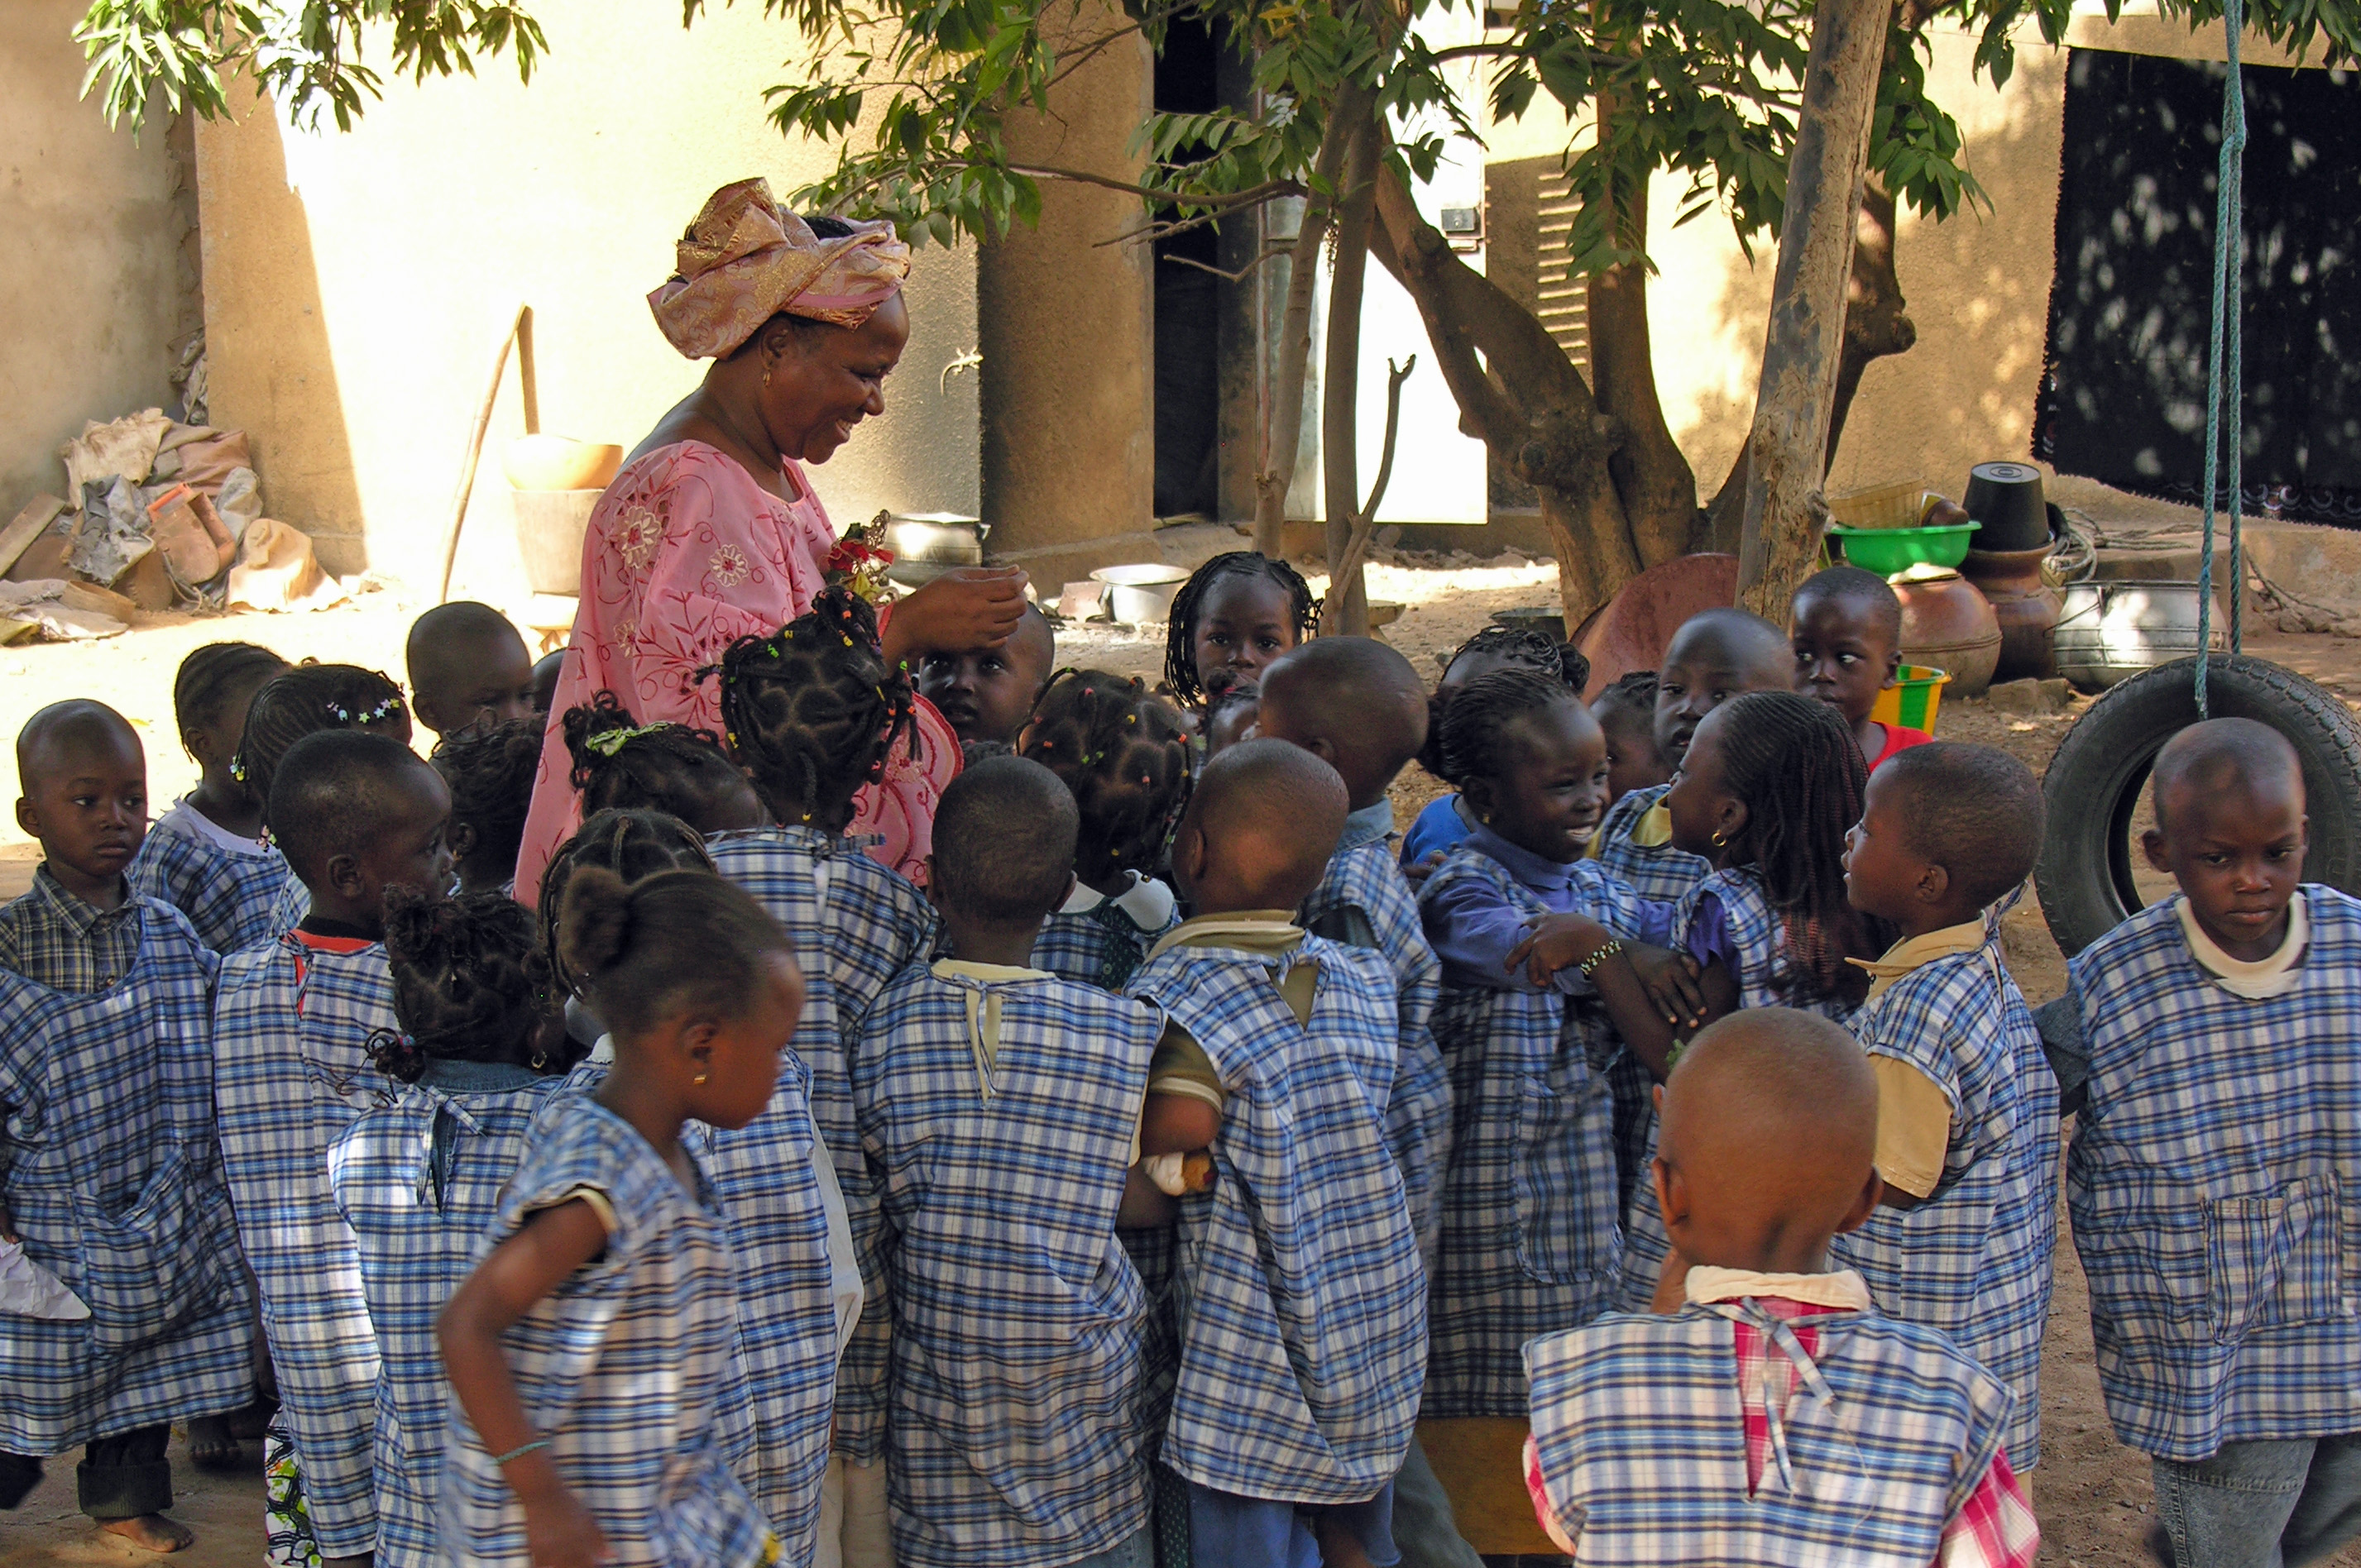 Children from a kindergarten in Bamako gather around their teacher. Early Childhood Development is an important focus of the Aga Khan Foundation, as part of their commitment to providing better early caring and learning environments for young children. Photo: Courtesy of AKDN